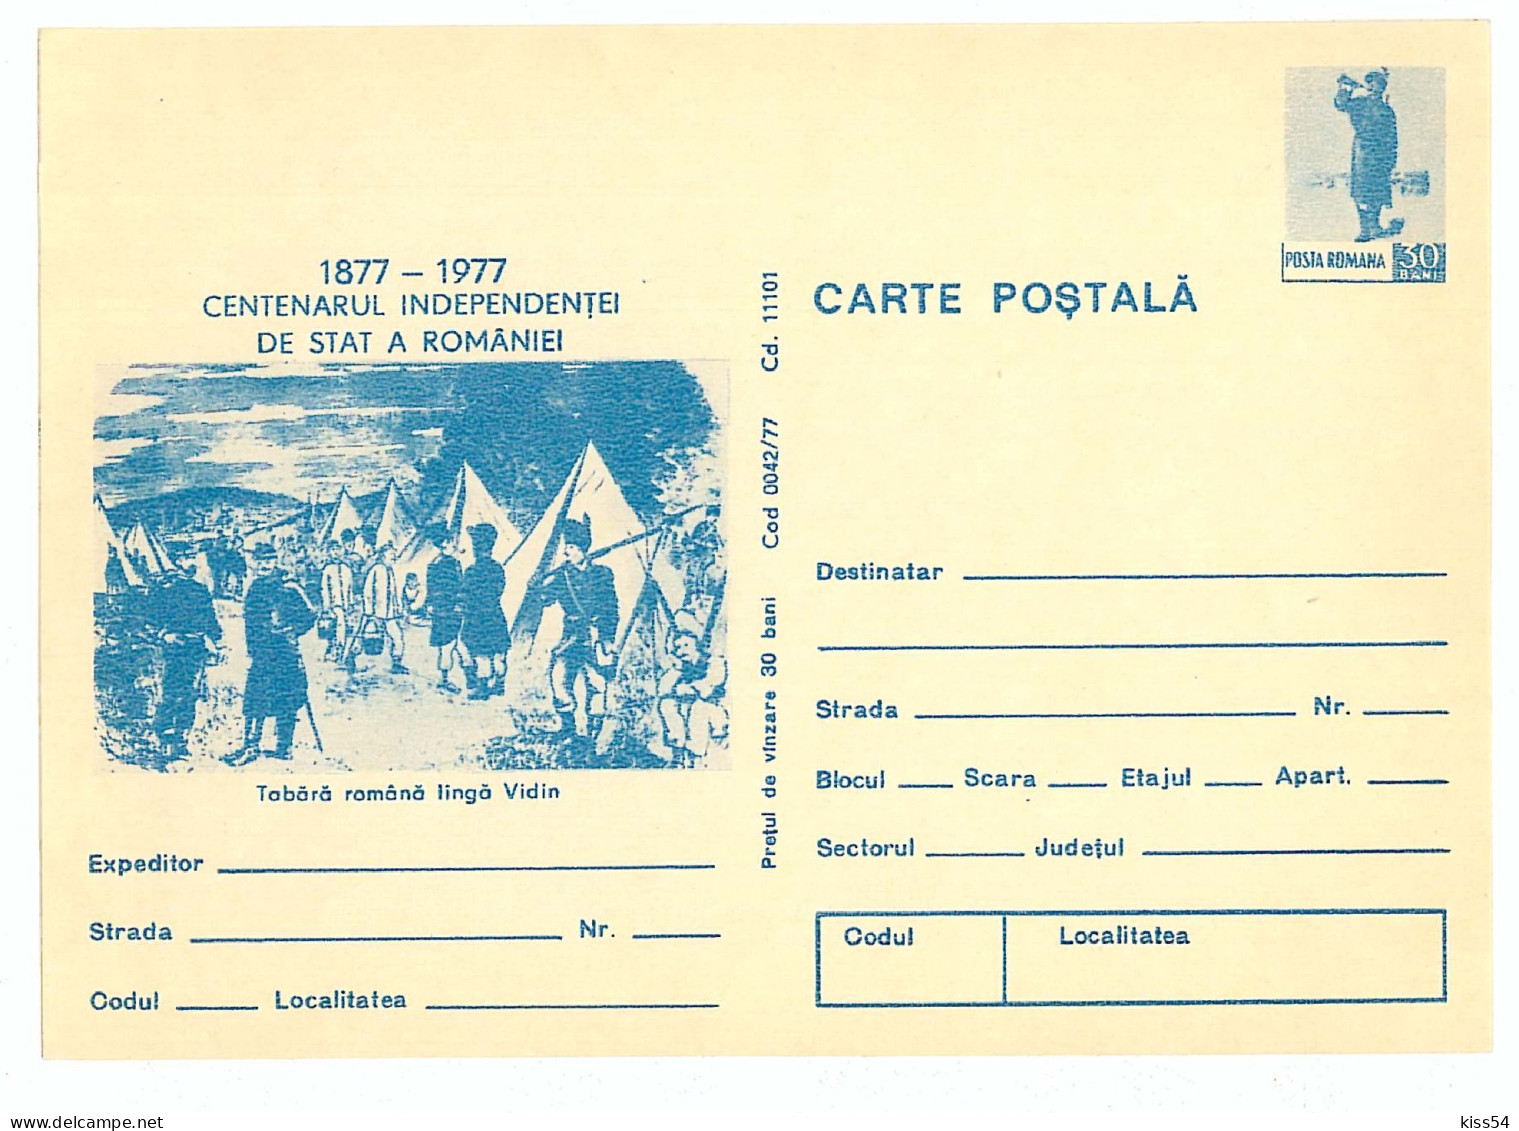 IP 77 A - 42 Centenary Independence Of Romania - Stationery - Unused - 1977 - Ganzsachen